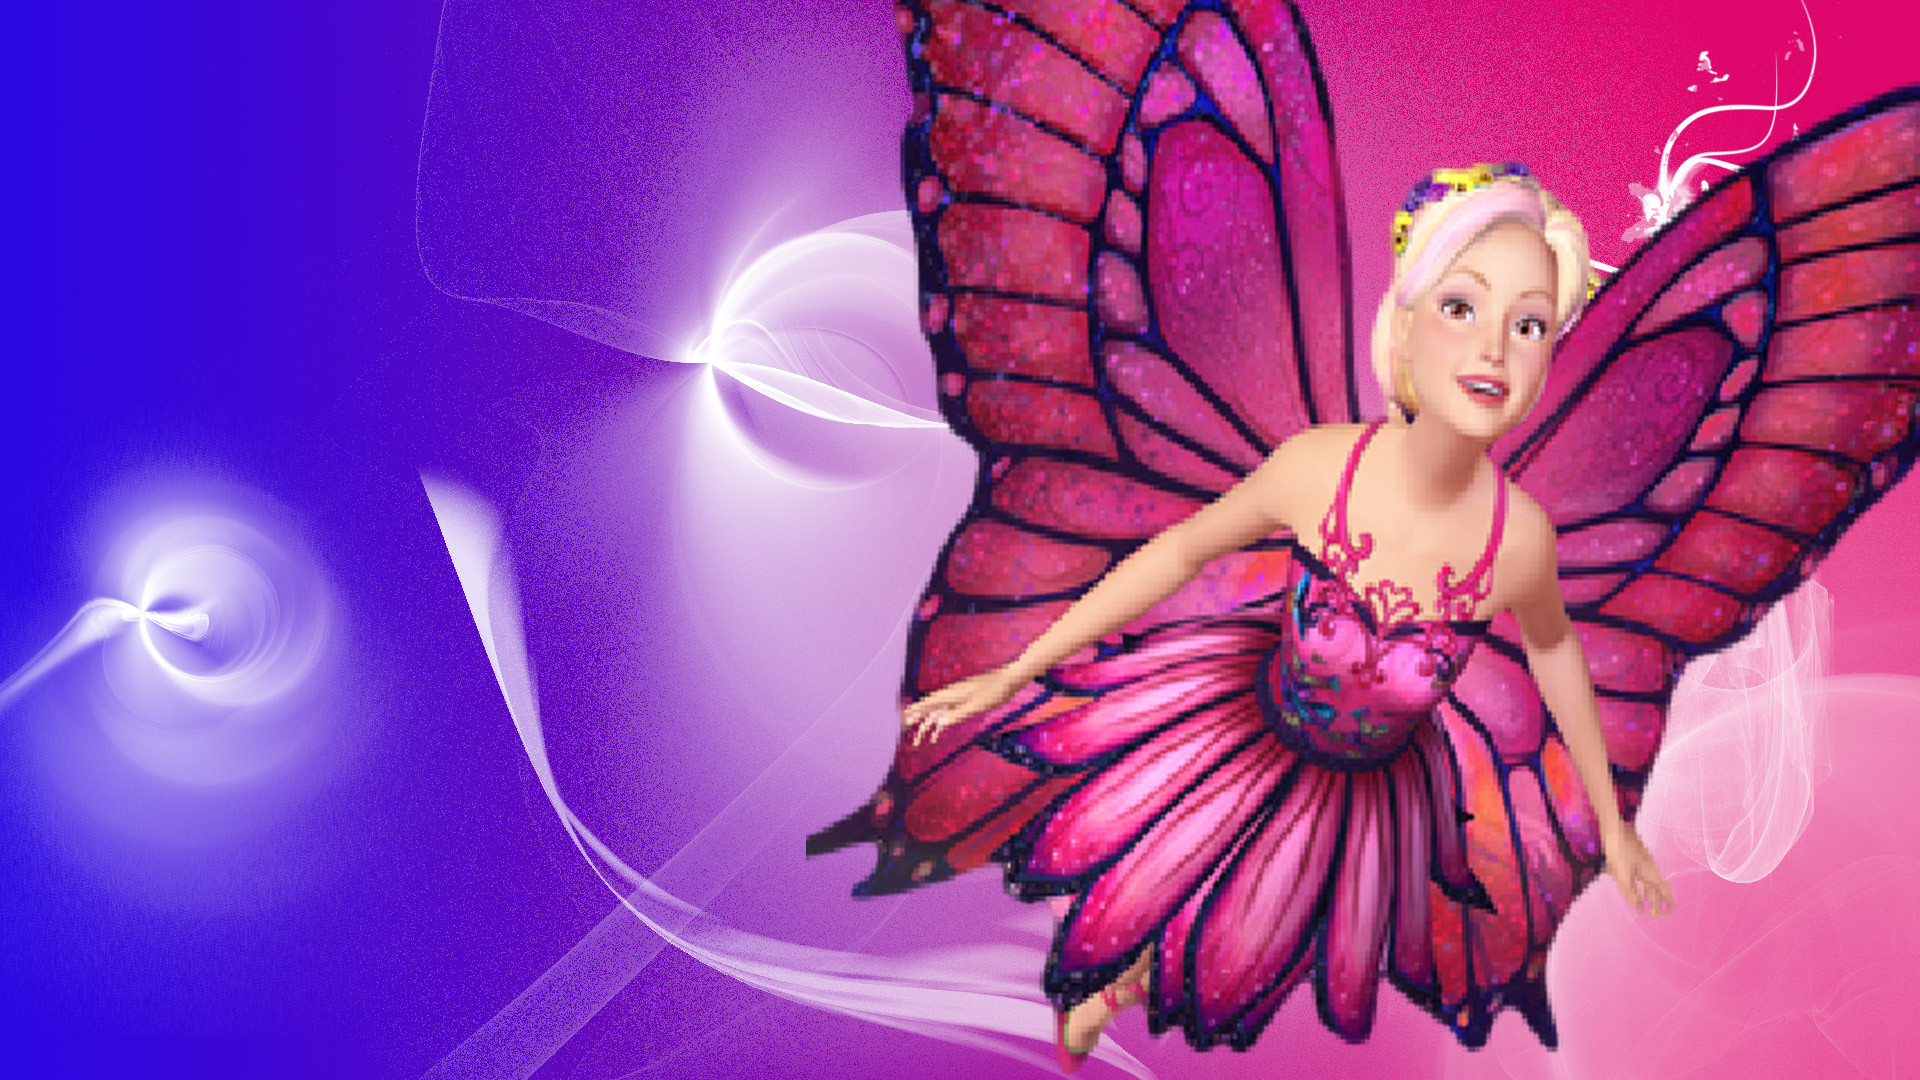 1920x1080 Newly Released Barbie Movies images Barbie Mariposa And The Fairy Princess  HD wallpaper and background photos